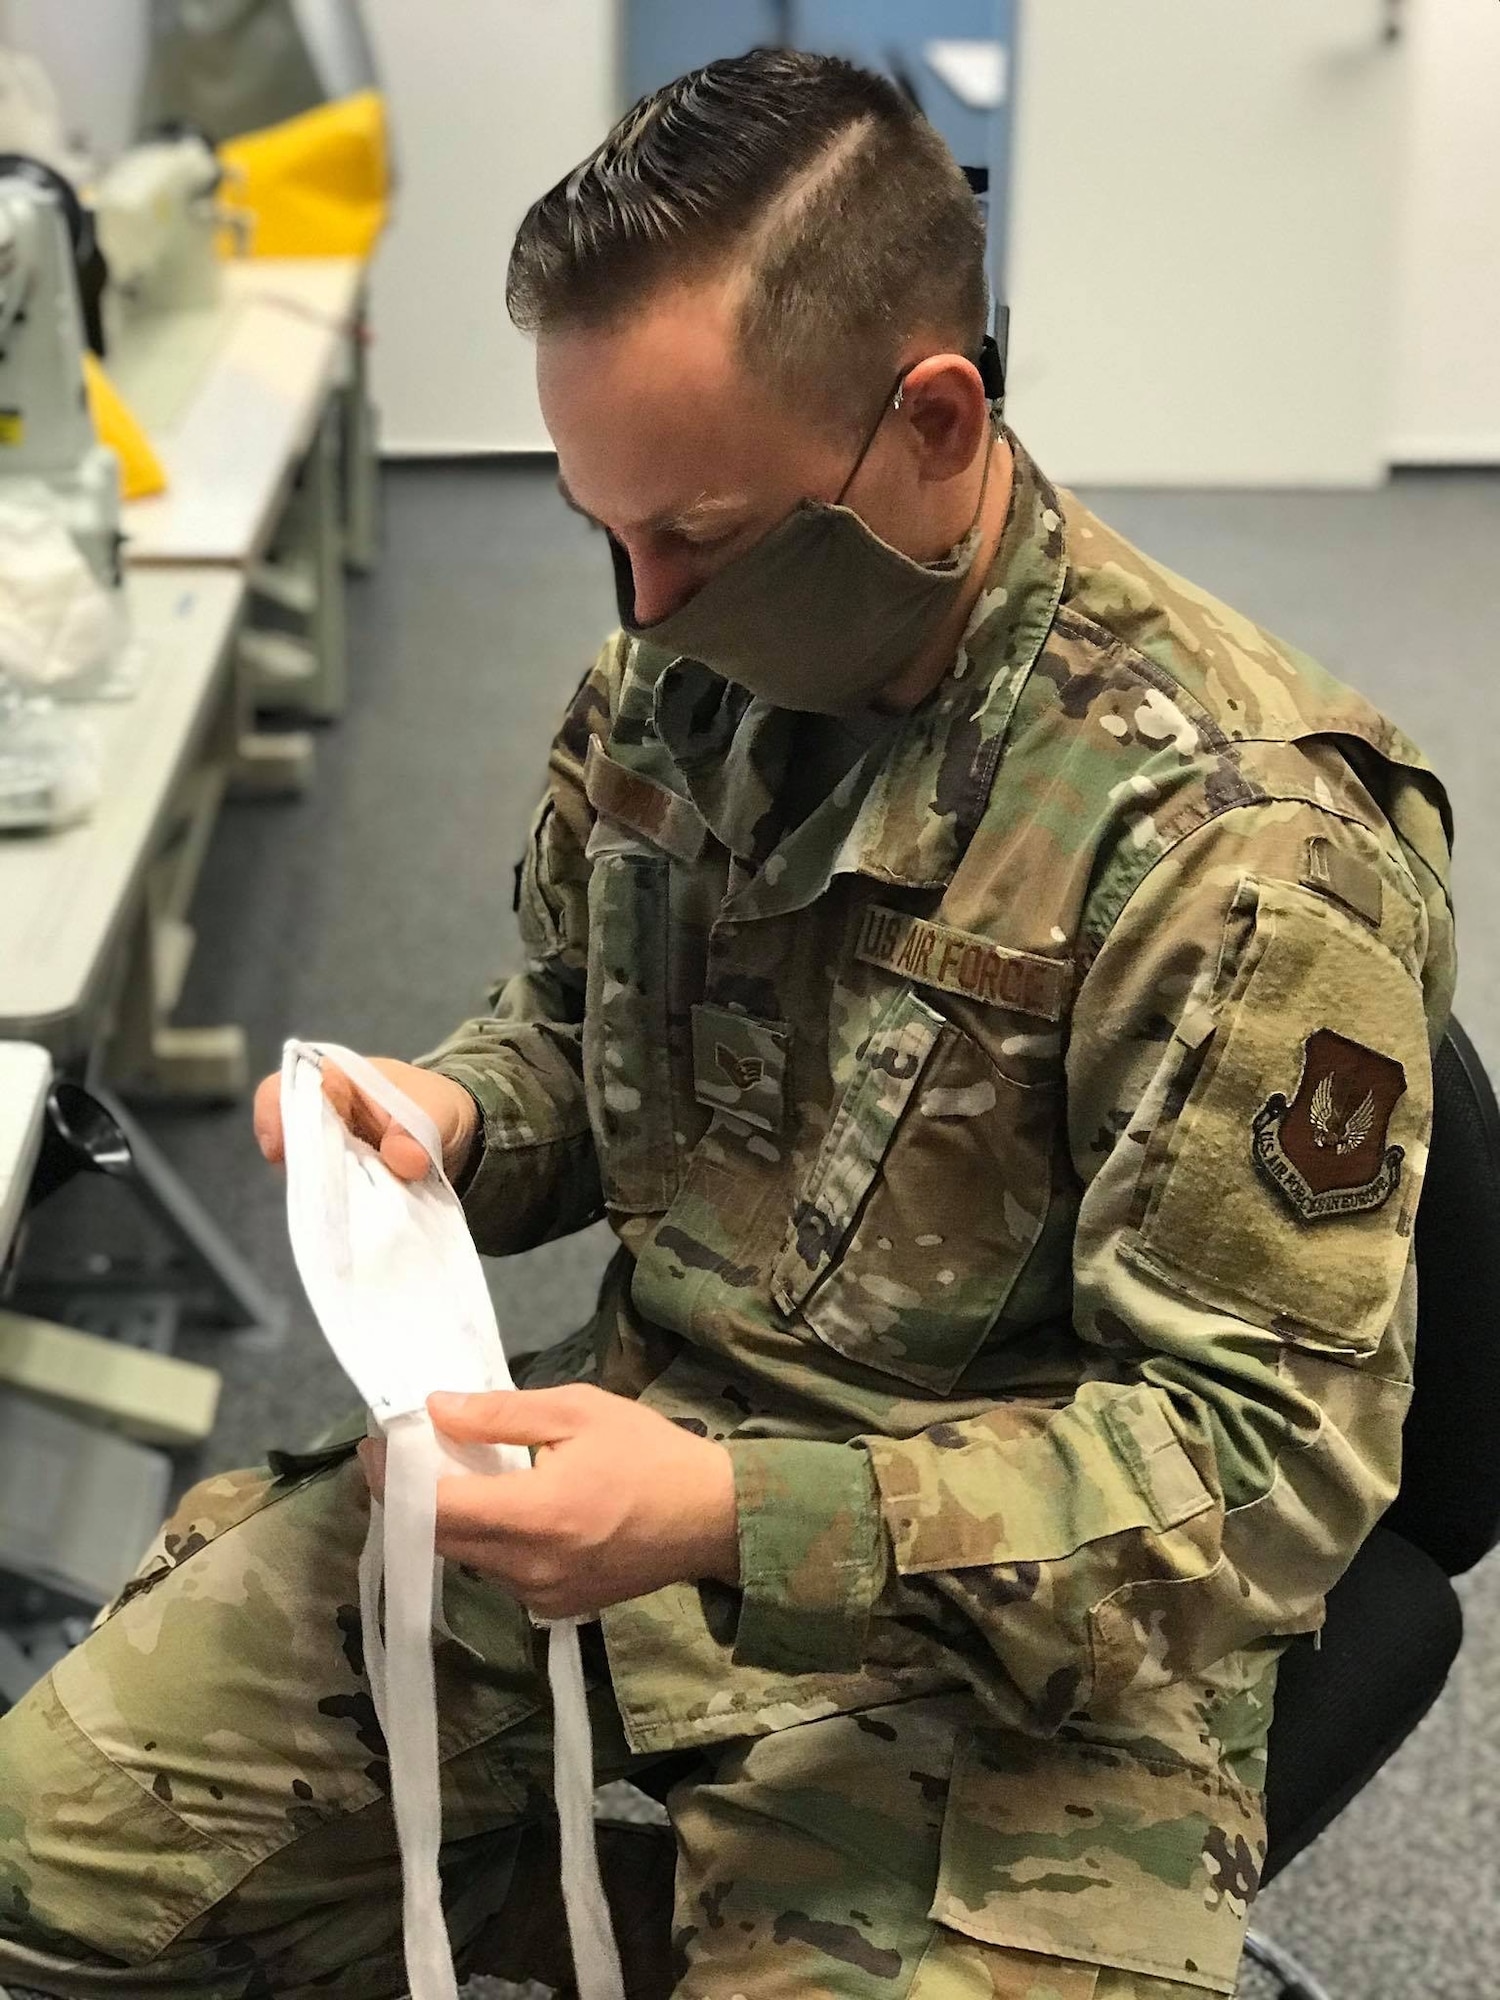 U.S. Air Force Staff Sgt. Jacob Wade, 52nd Operations Support Squadron NCOIC of aircrew flight equipment main shop, inspects a newly made a face mask at Spangdahlem Air Base, Germany, April 13, 2020. Wade and U.S. Air Force Tech Sgt. Kevin Robinson, both 52nd OSS members, volunteered to sew face masks for the base populous and local community in support of local efforts to combat COVID-19. The 52nd Fighter Wing is doing everything possible to help minimize the spread of COVID-19 and is committed to limiting the spread in both the on and off-base community. (52nd Operations Support Squadron courtesy photo)